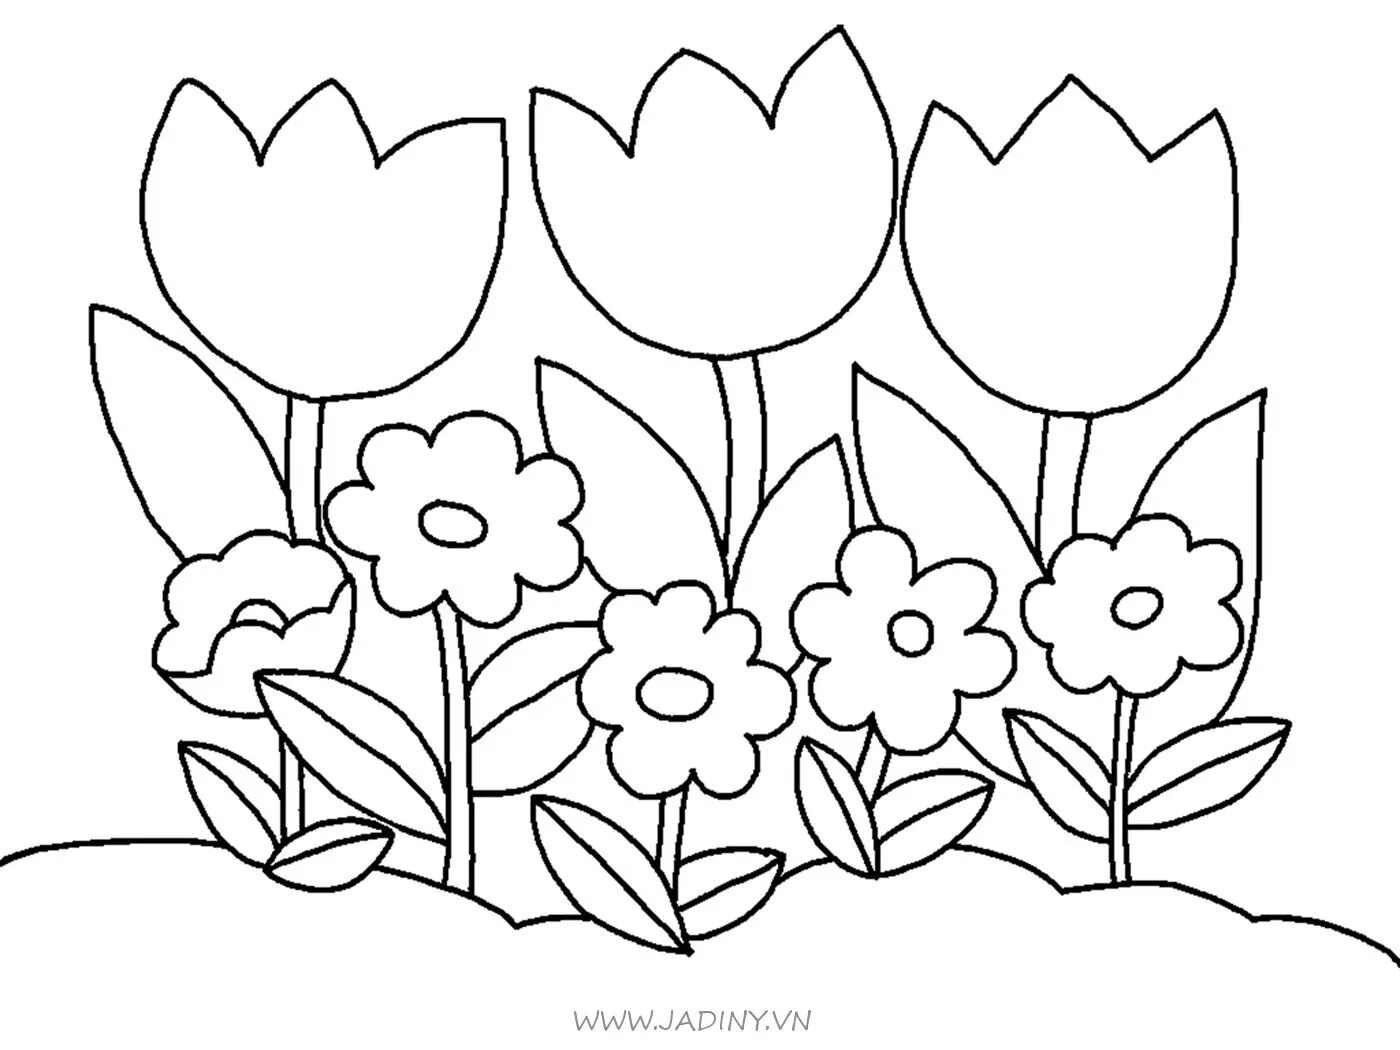 Creative flower coloring book for 4-5 year olds